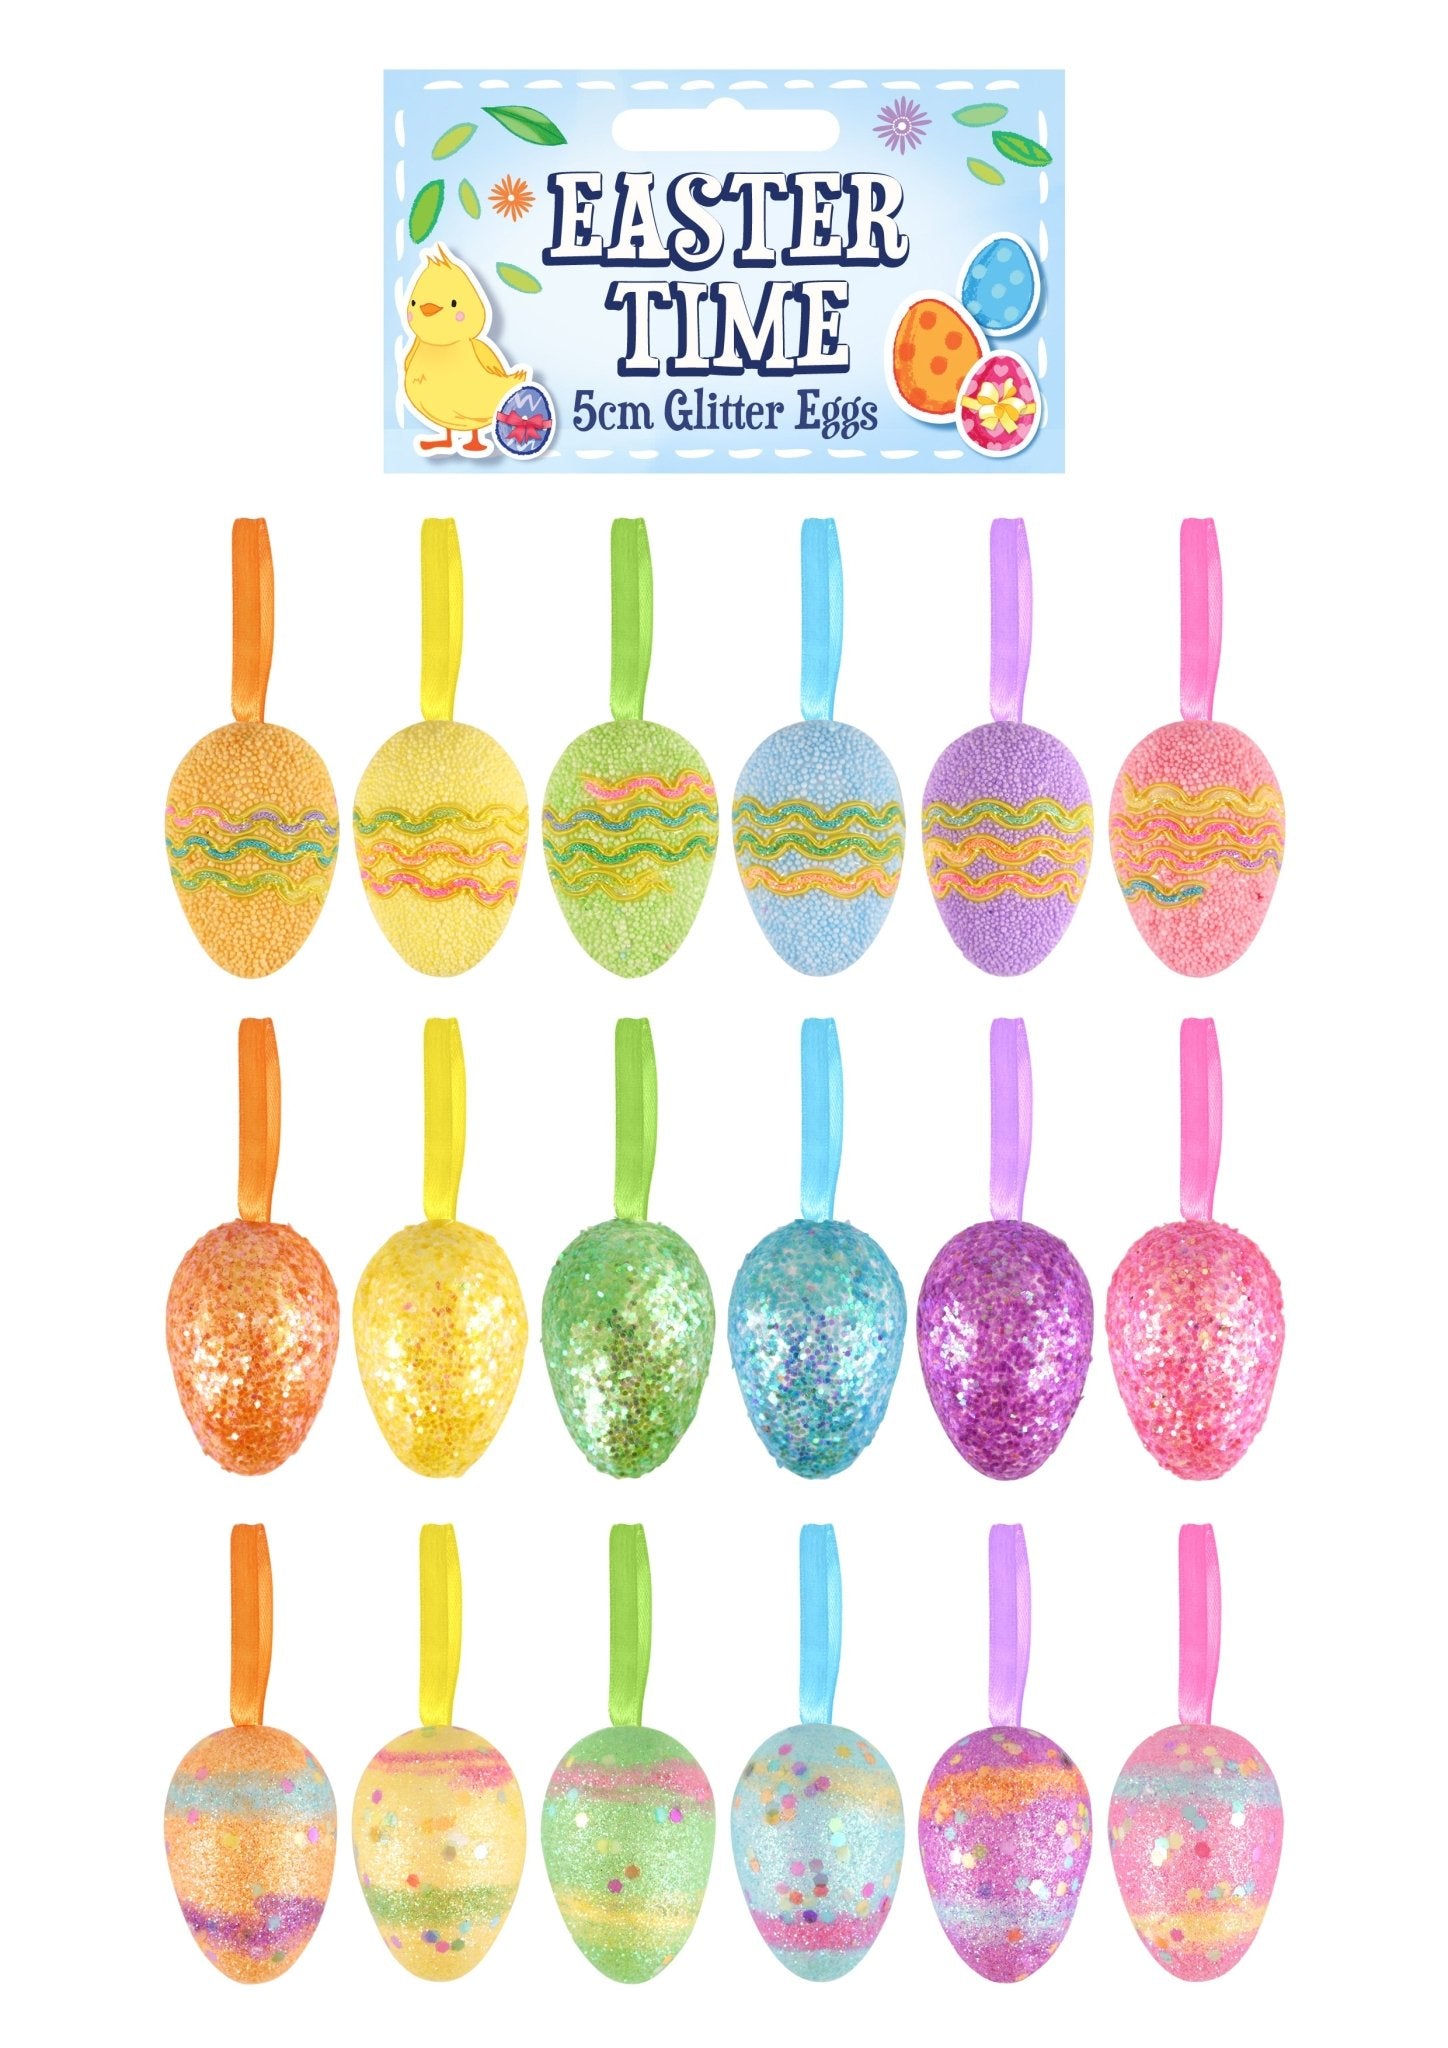 1 X Glitter Easter Egg Decorations and Party Favours (5cm) 18 Assorted Colours and Designs (6 Assorted Eggs in one pack) - Bulk Bargain